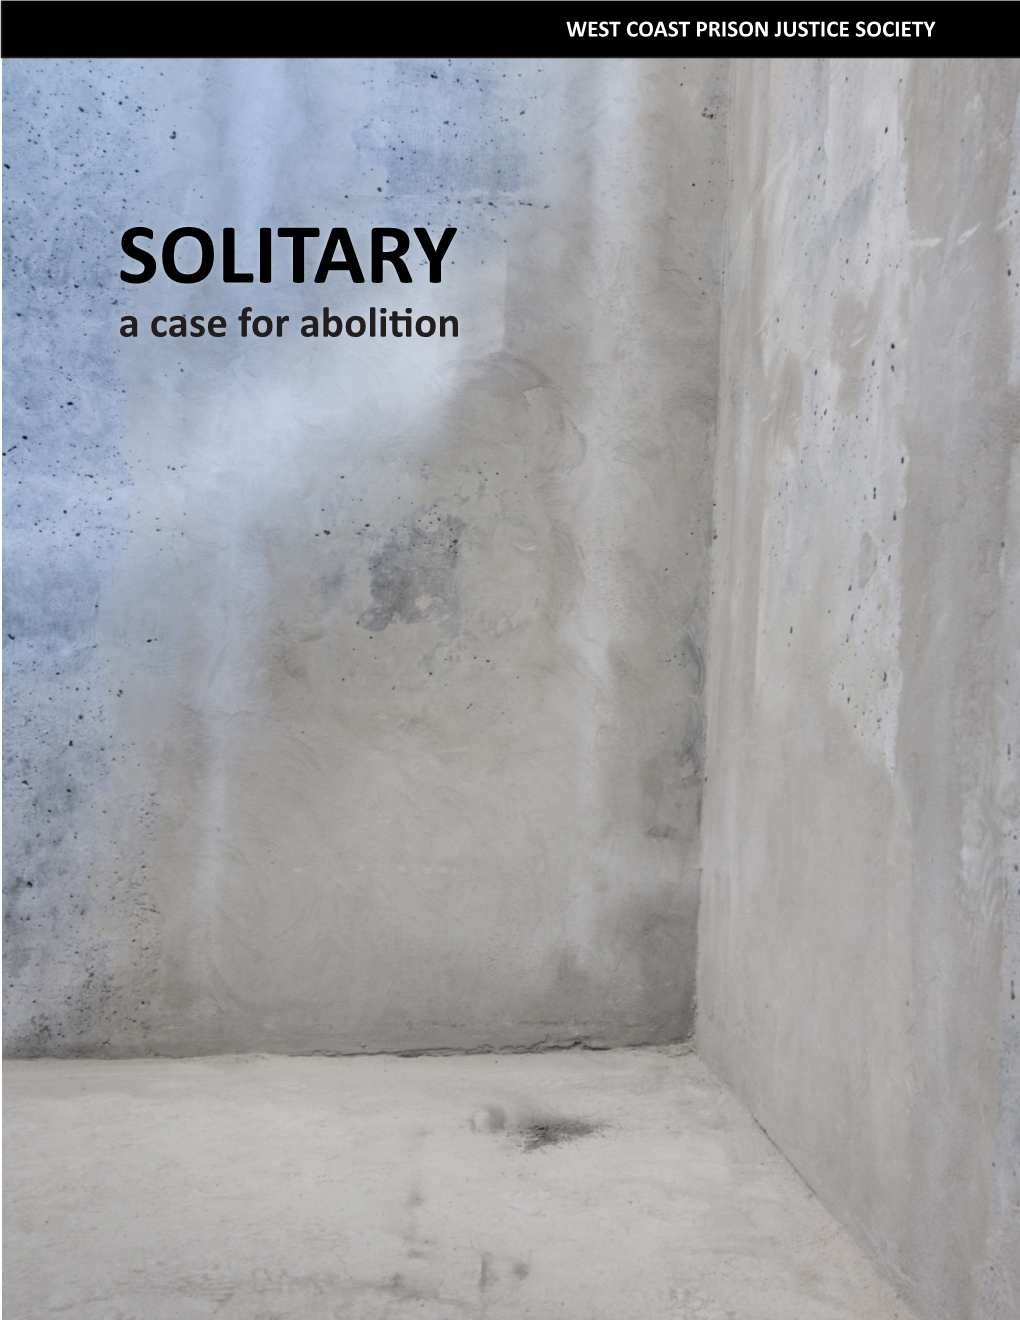 SOLITARY a Case for Abolition West Coast Prison Justice Society SOLITARY: a CASE for ABOLITION